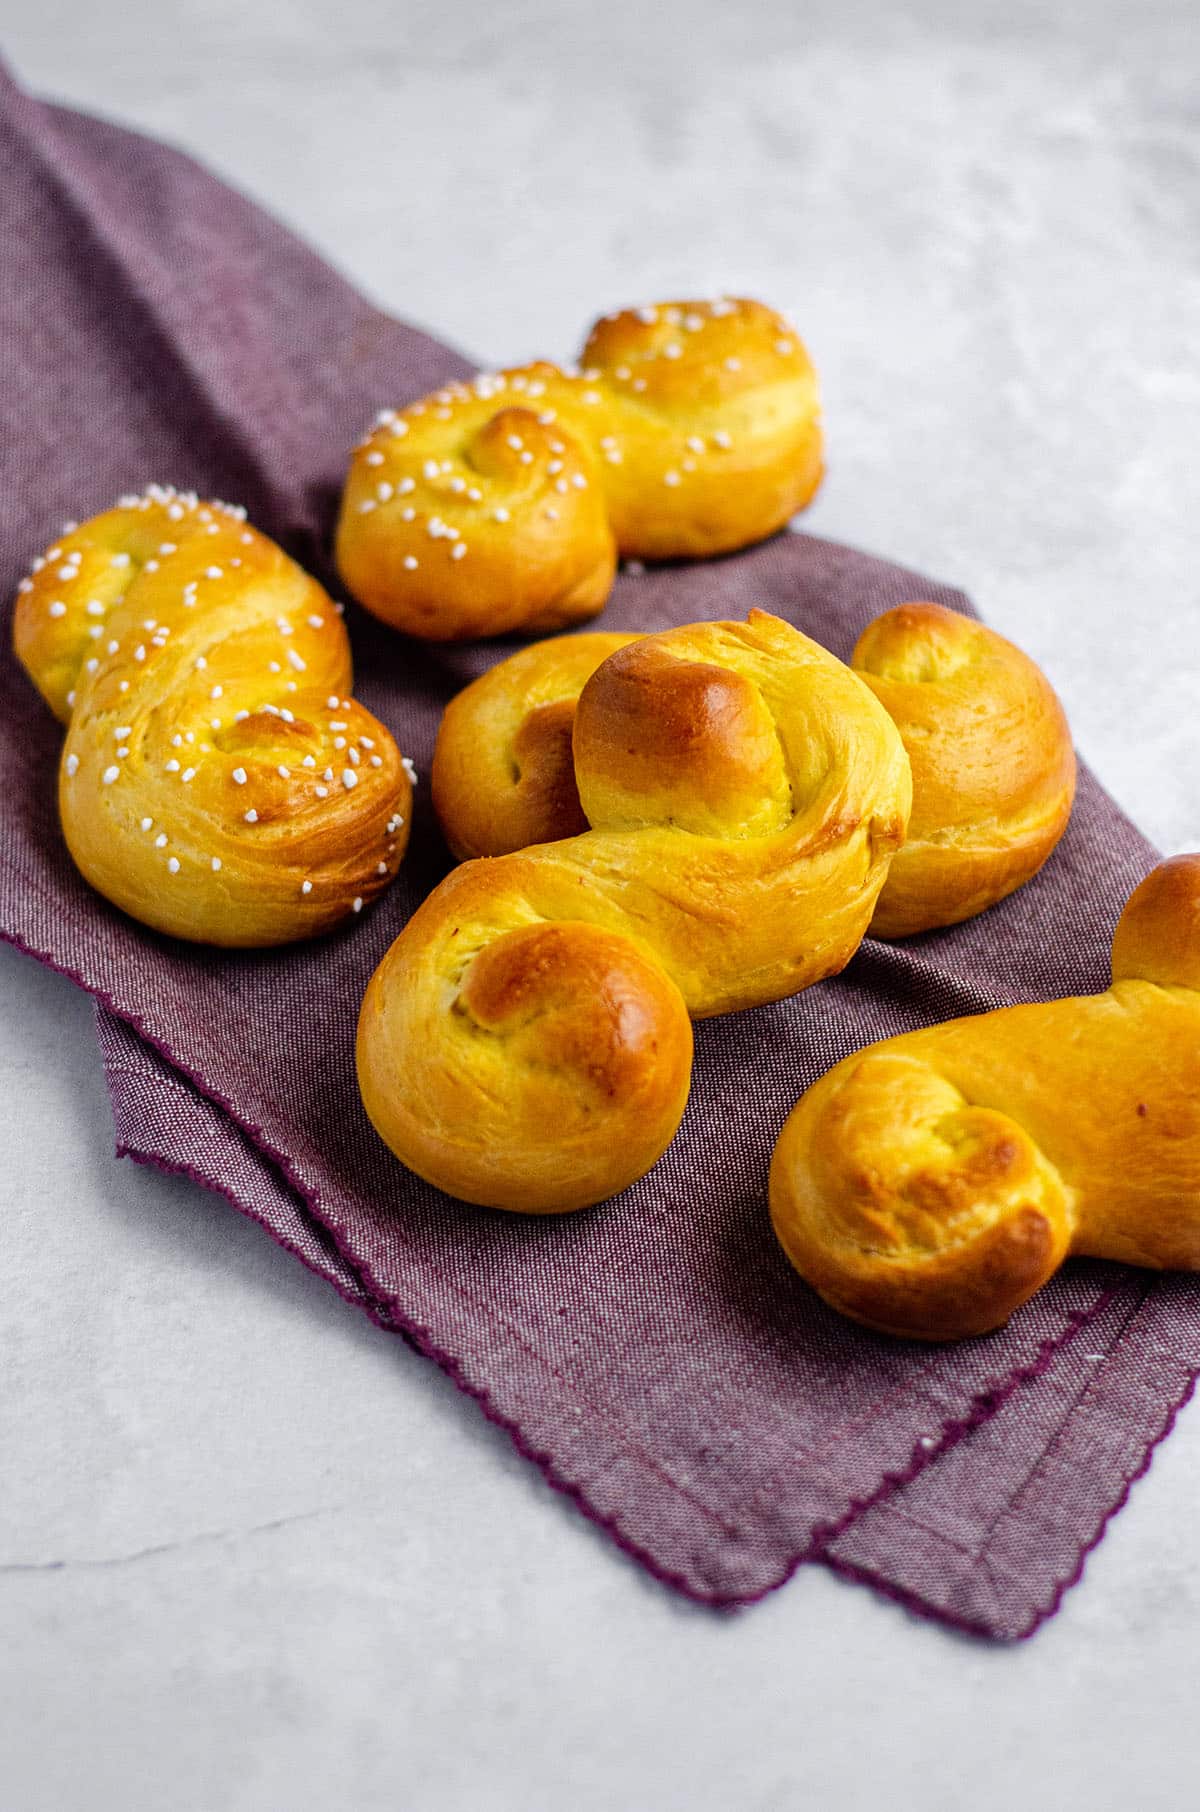 St. Lucia Saffron Buns: Traditional soft and fluffy Swedish holiday buns infused with saffron.